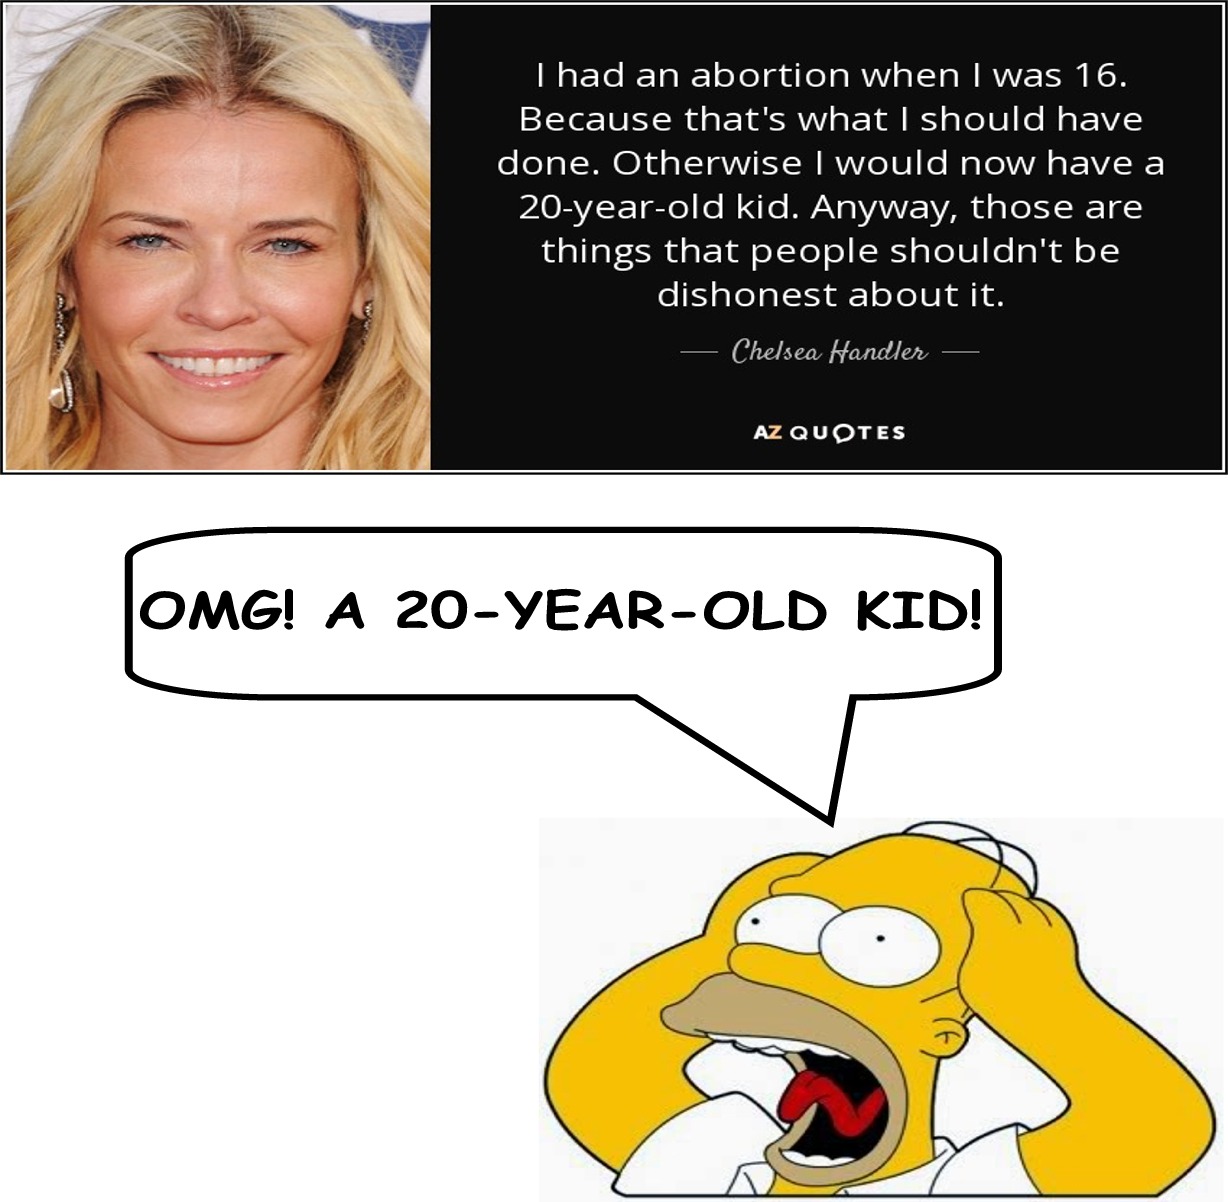 cartoon - Thad an abortion when I was 16. Because that's what I should have done. Otherwise I would now have a 20yearold kid. Anyway, those are things that people shouldn't be dishonest about it. Chelsea Handler Az Quotes Omg! A 20YearOld Kid!